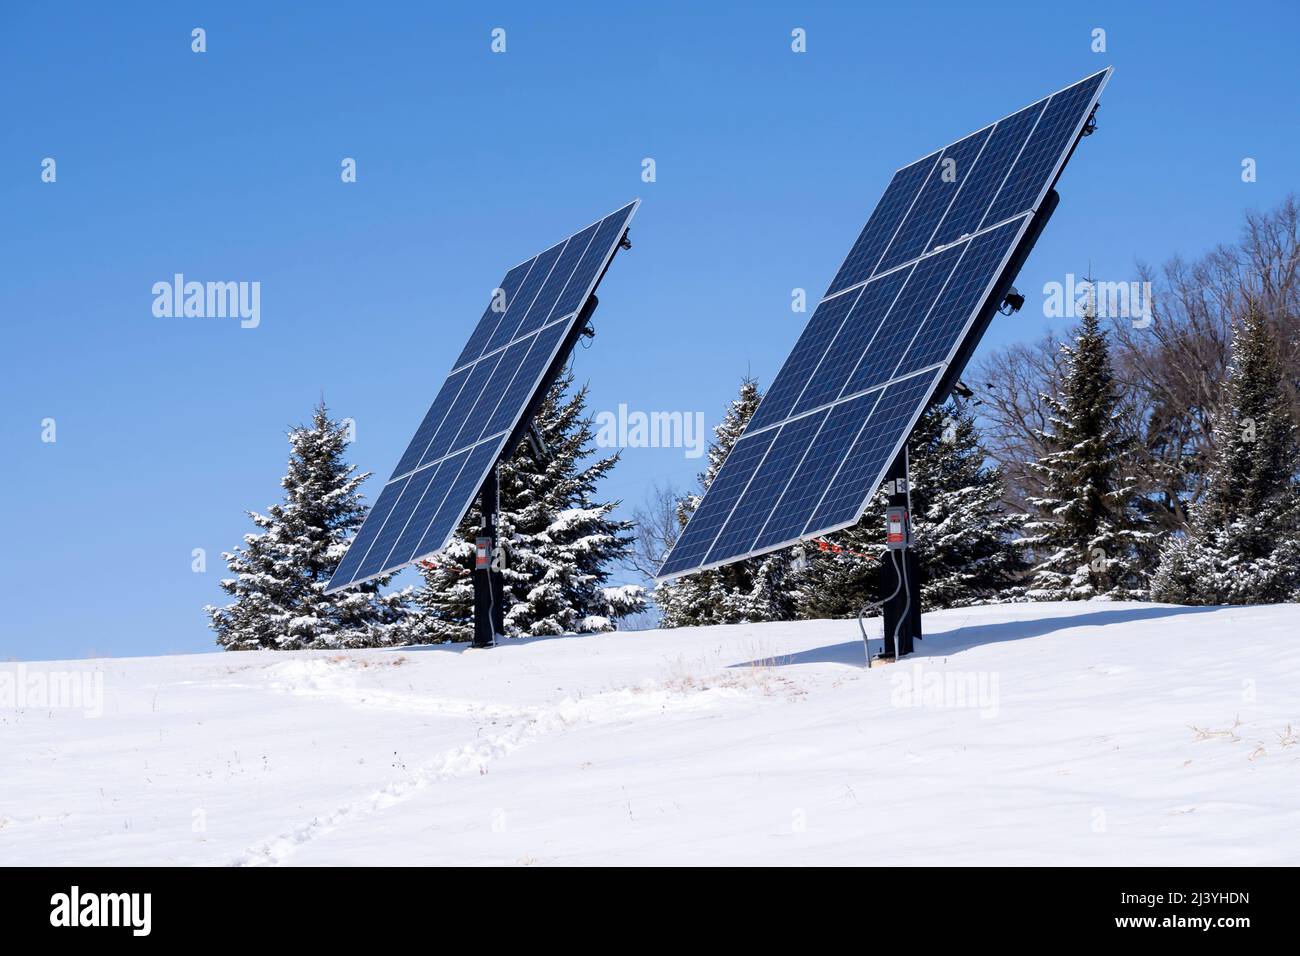 photovoltaic solar panels on a hilltop with a row of spruce trees as a windbreak in a winter rural setting. Stock Photo